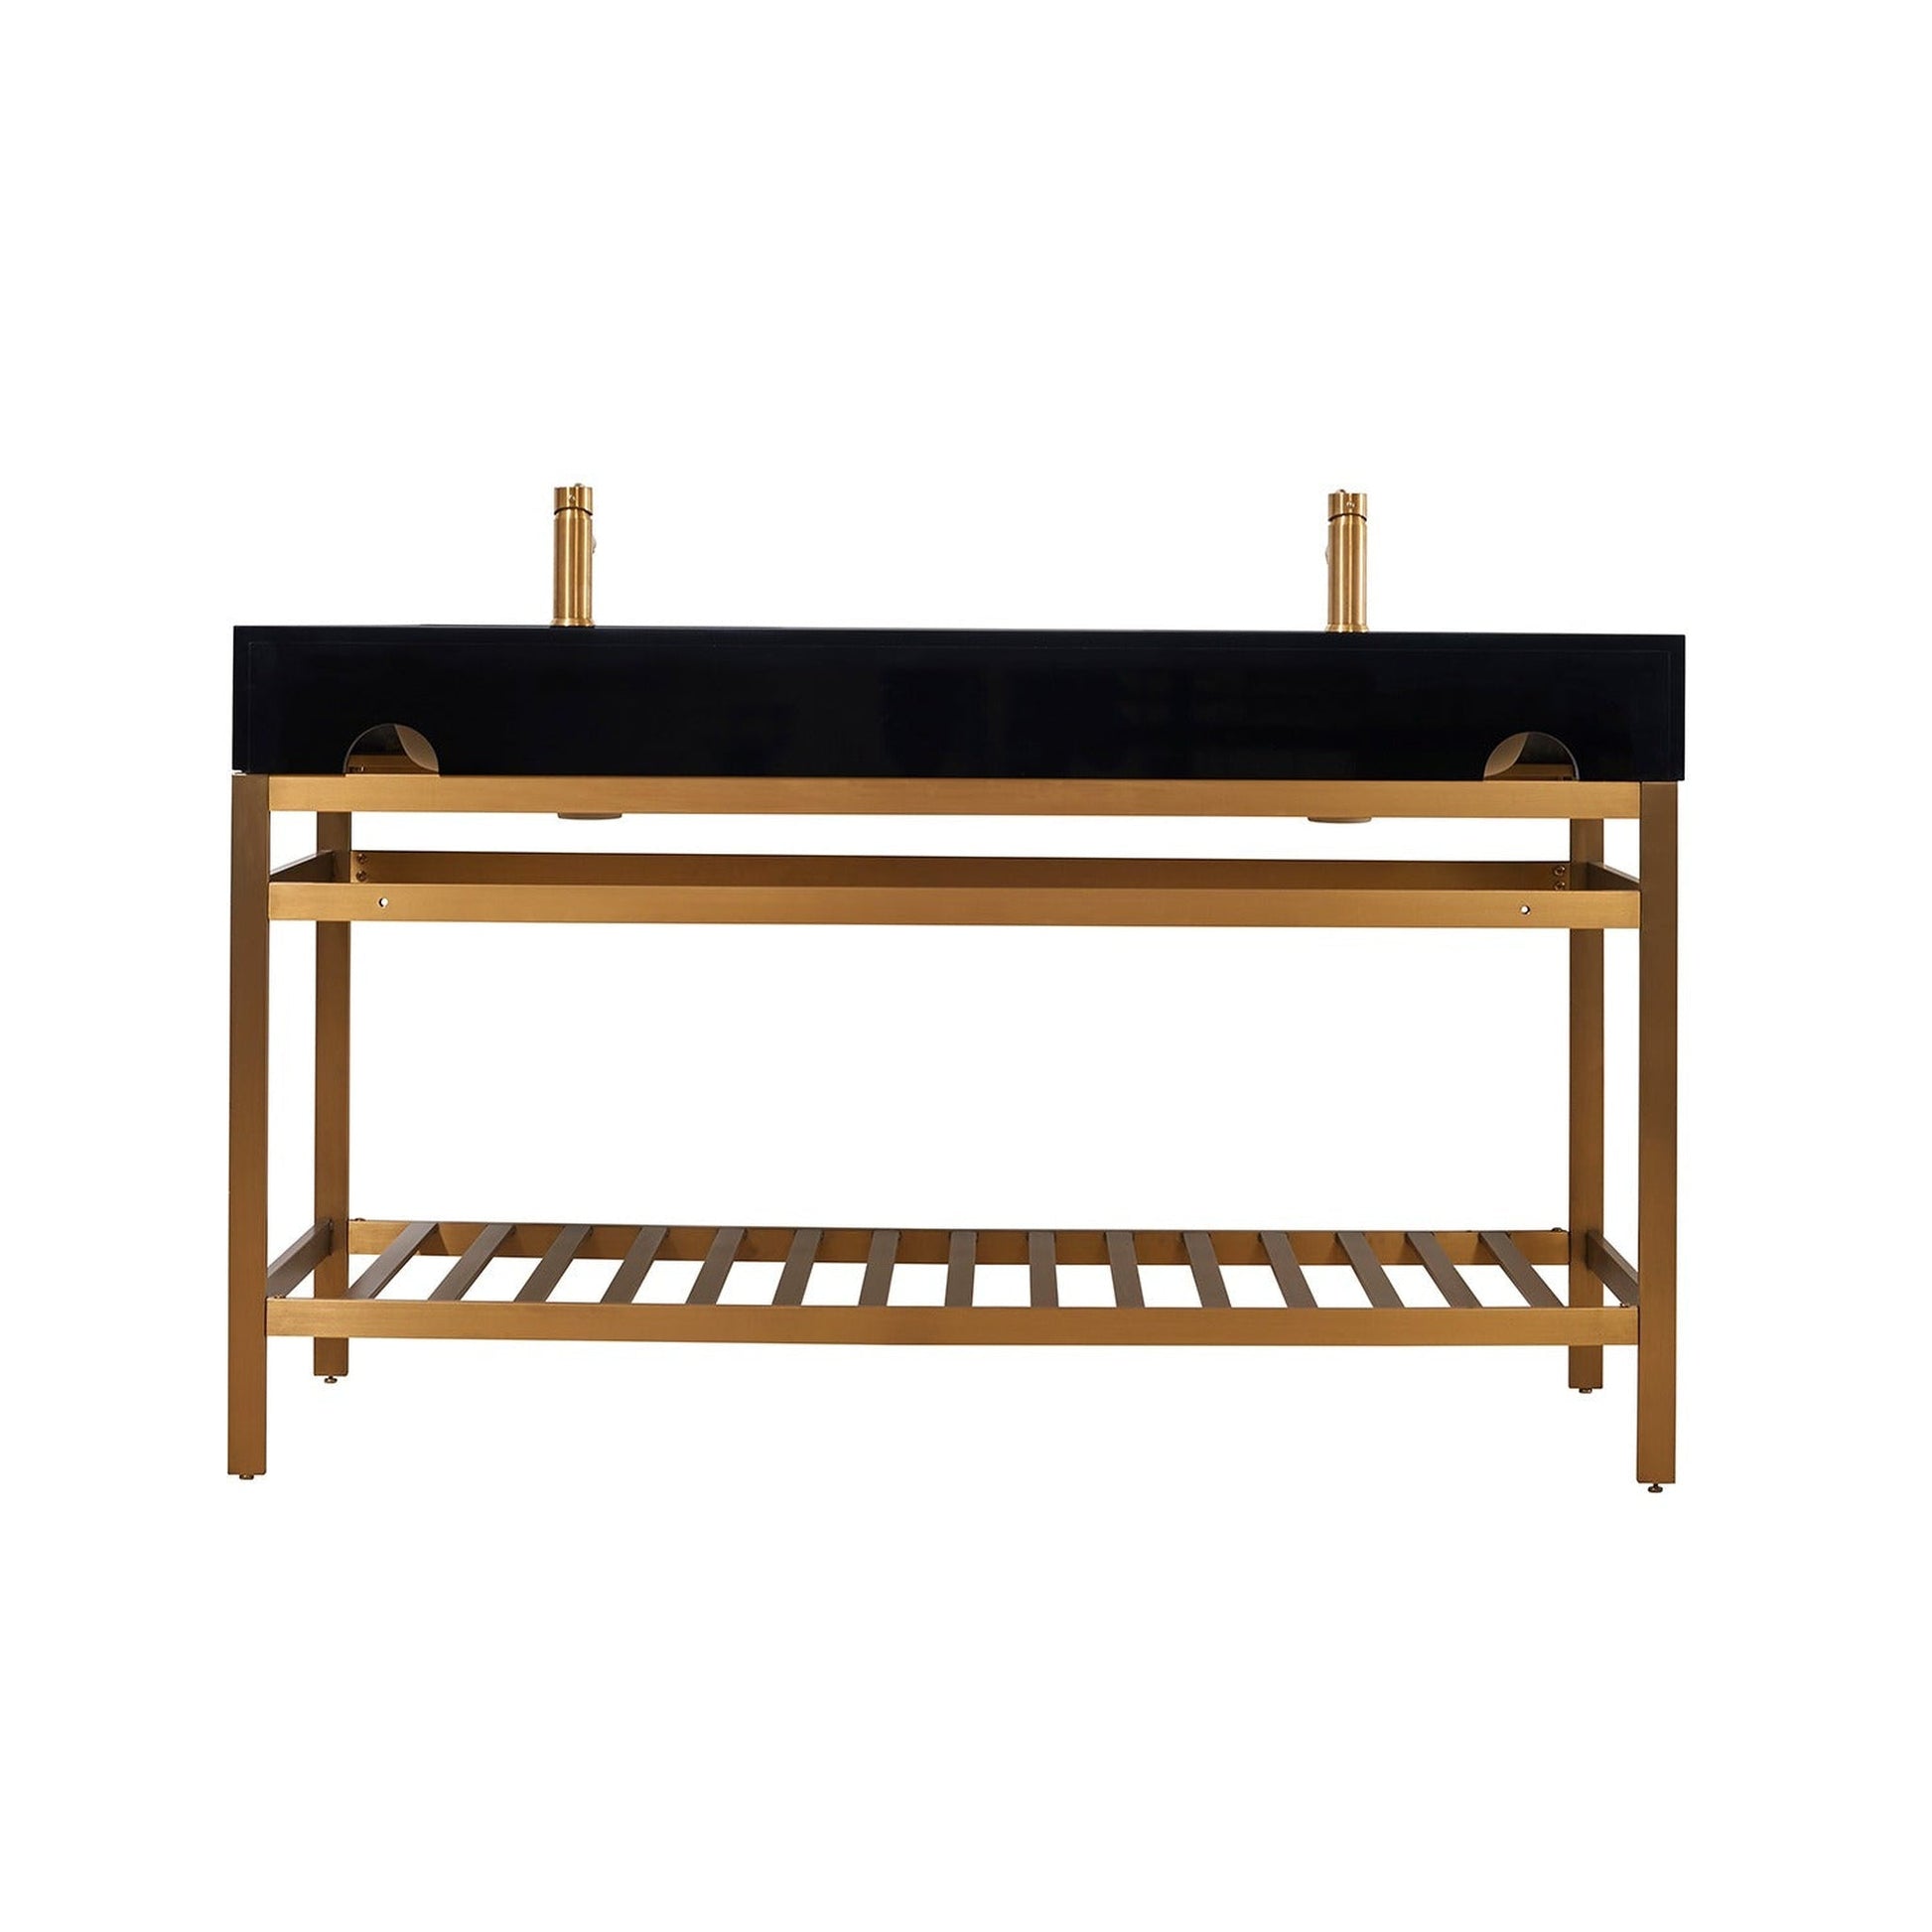 Altair Nauders 60" Brushed Gold Double Stainless Steel Bathroom Vanity Set Console With Imperial Black Stone Top, Two Rectangular Undermount Ceramic Sinks, and Safety Overflow Hole